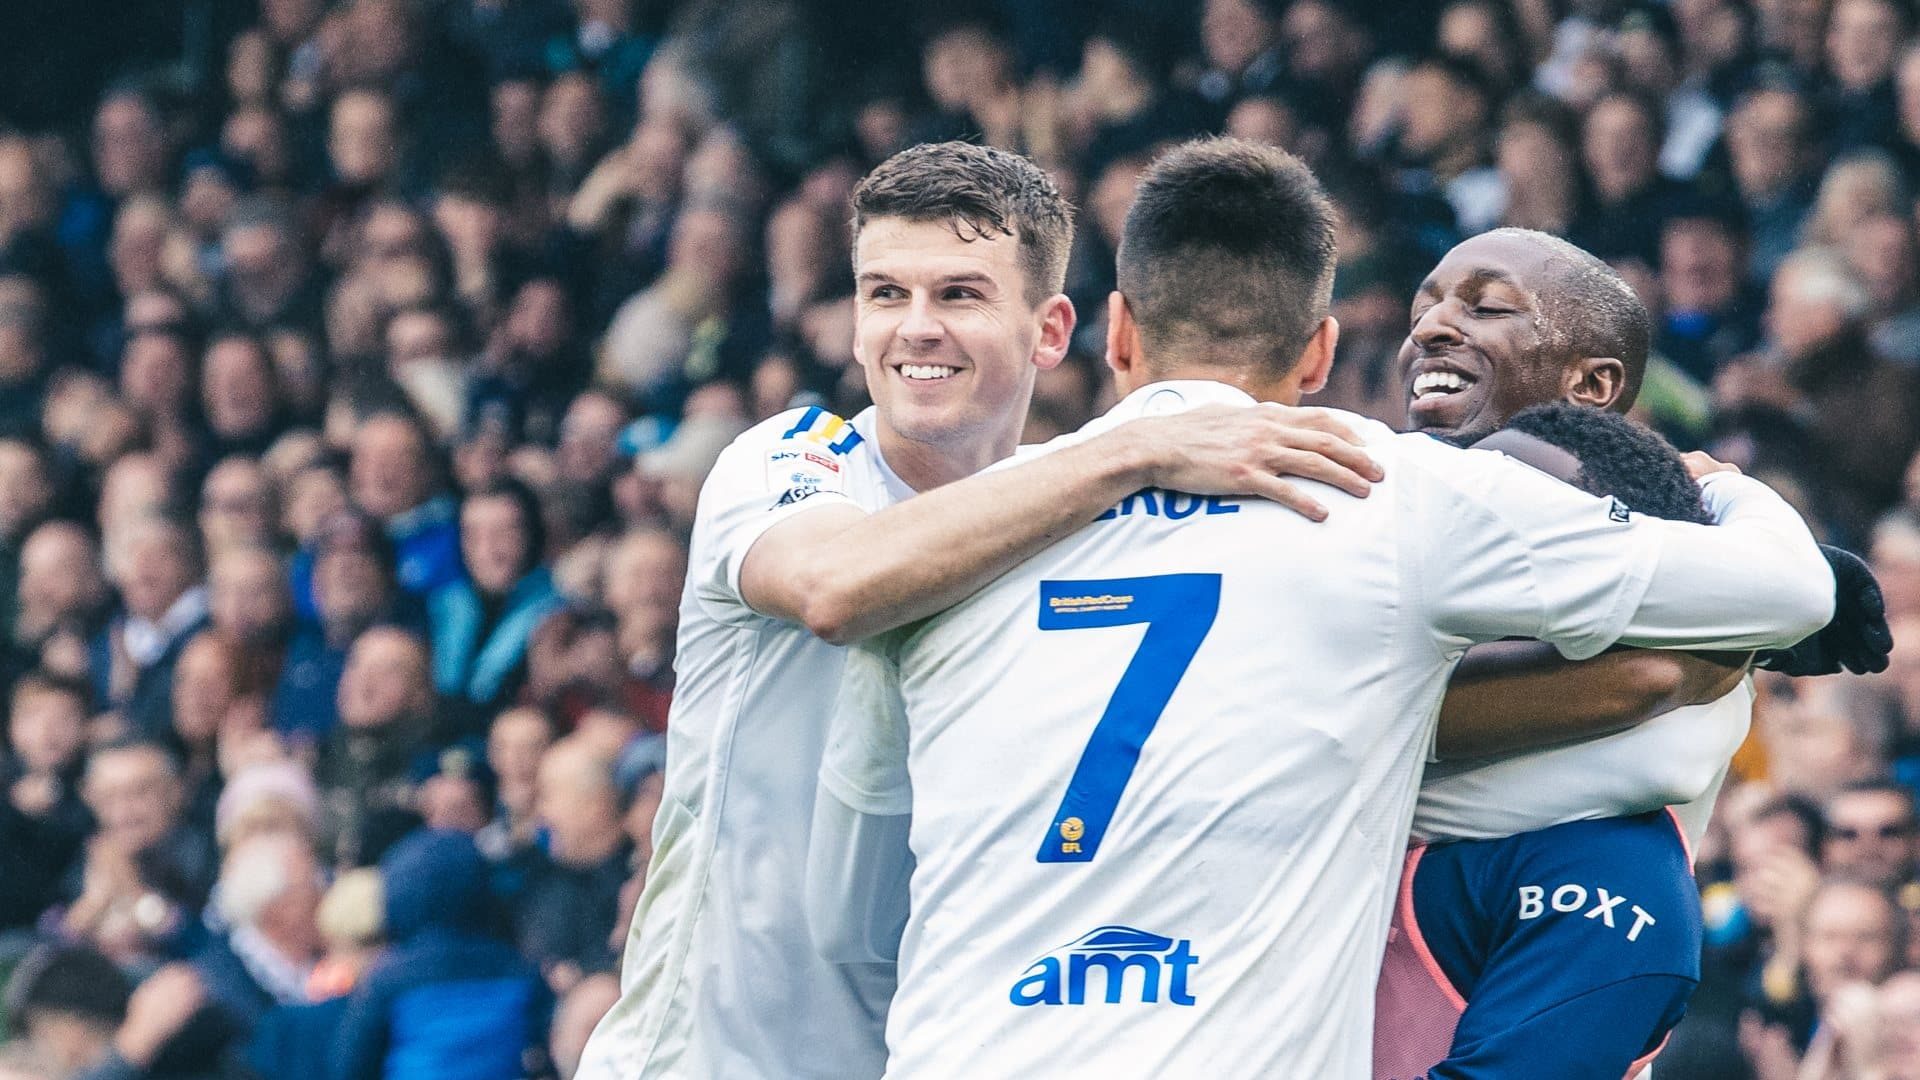 Sam Byram celebrating with Summerville, Gnonto, Piroe and Kamara against Huddersfield, looking all happy and smiling